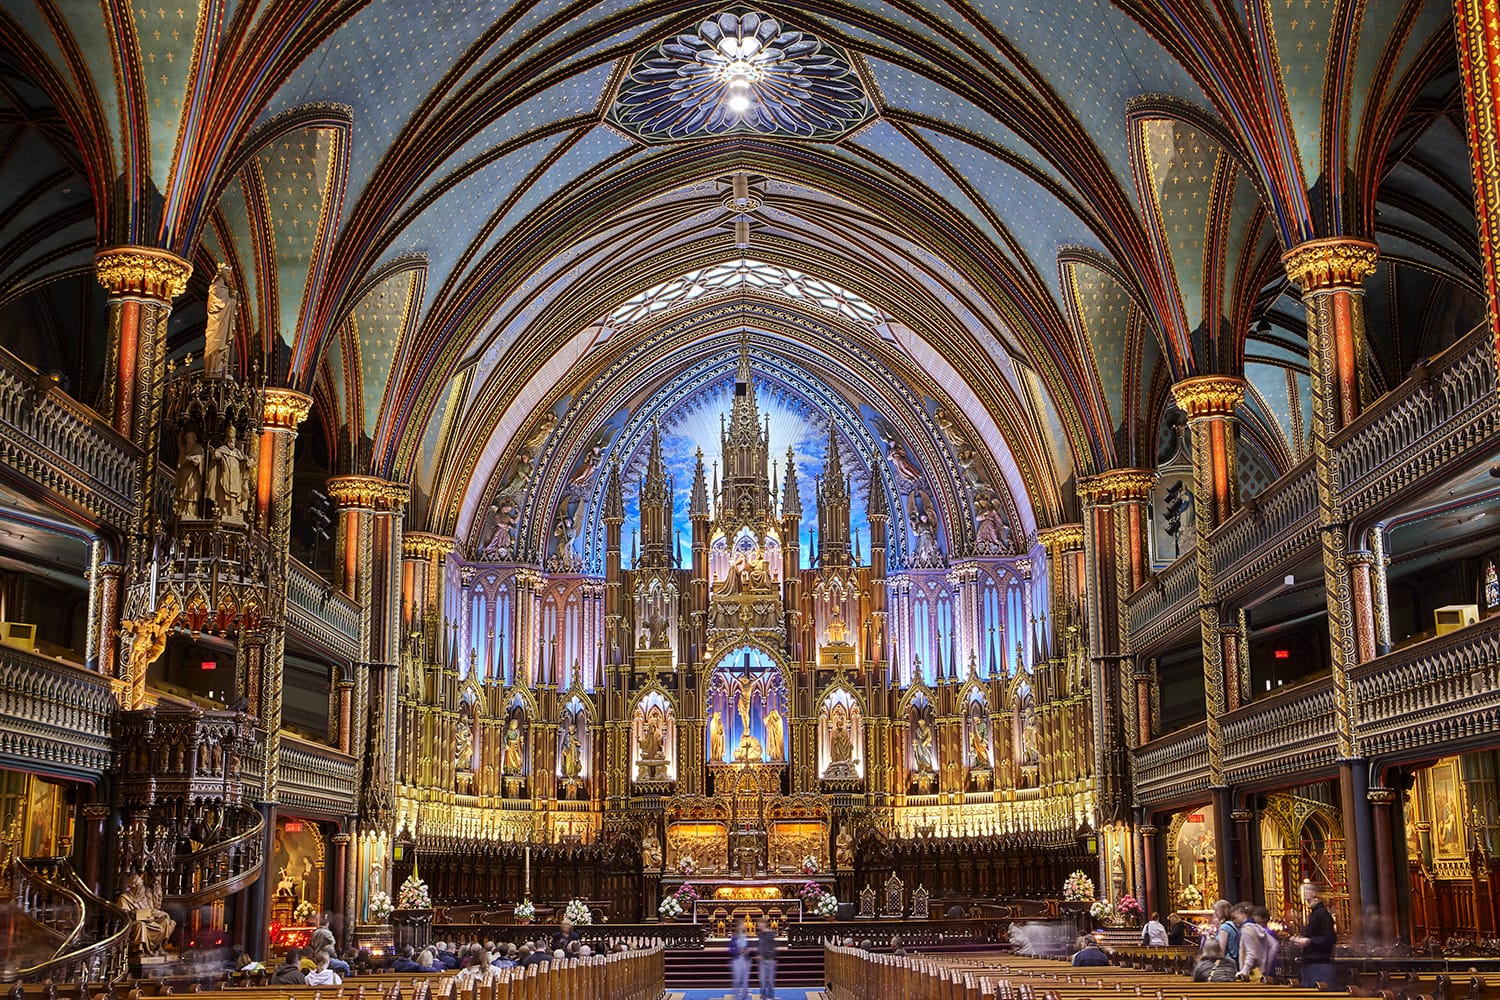 Interior of the Gothic revival Notre Dame basilica in Montreal, Canada